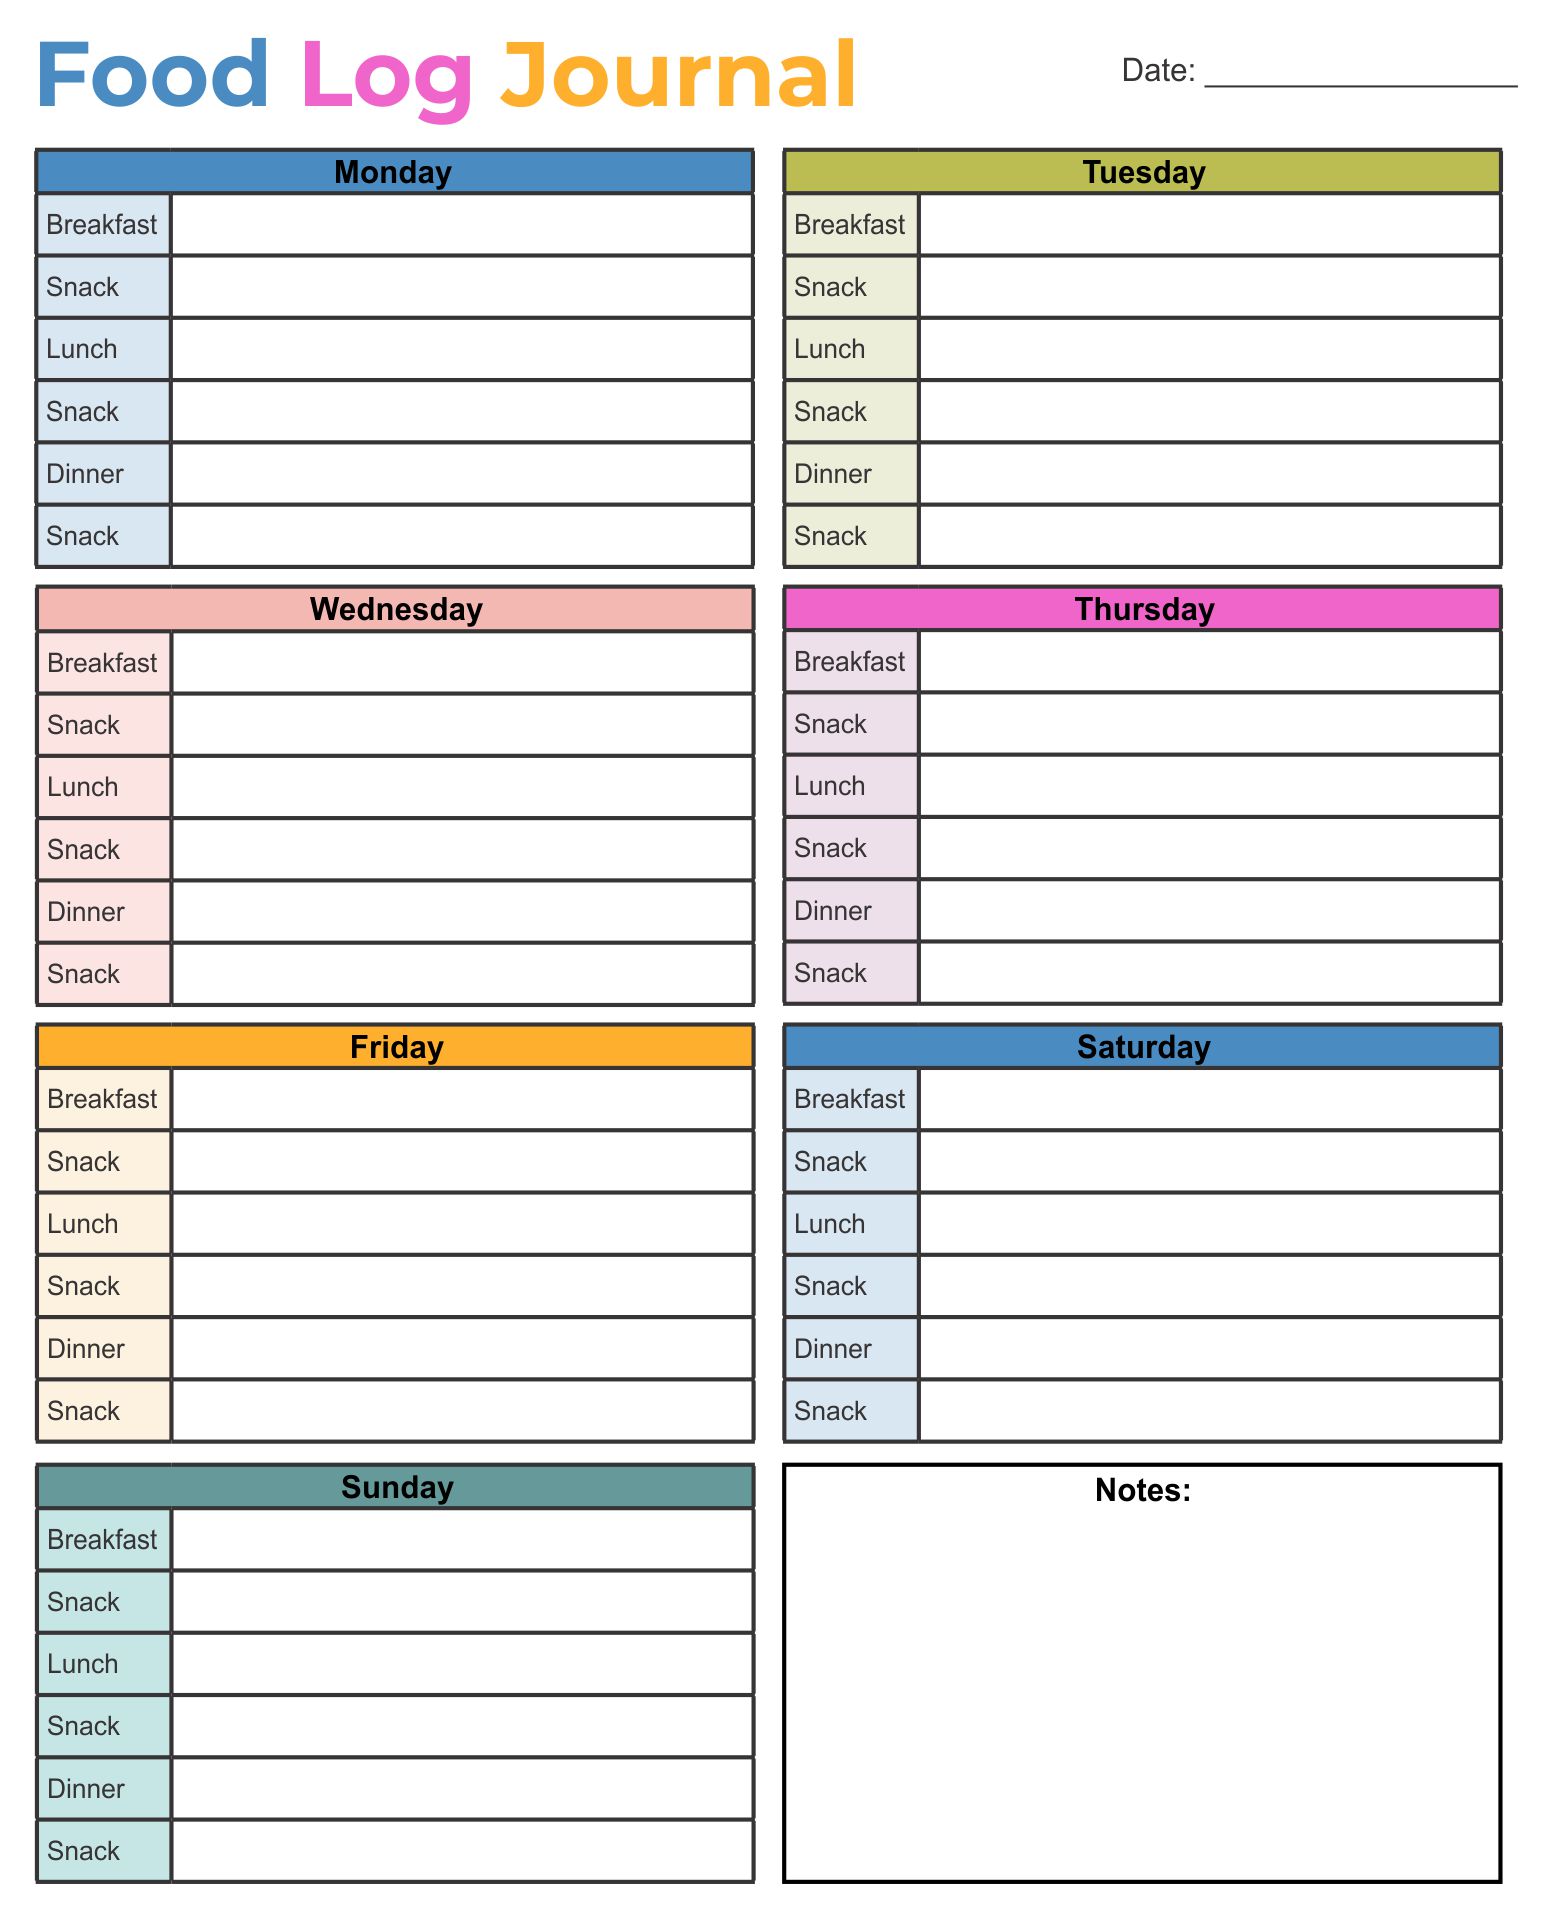 Daily Food Diary Template from printablee.com